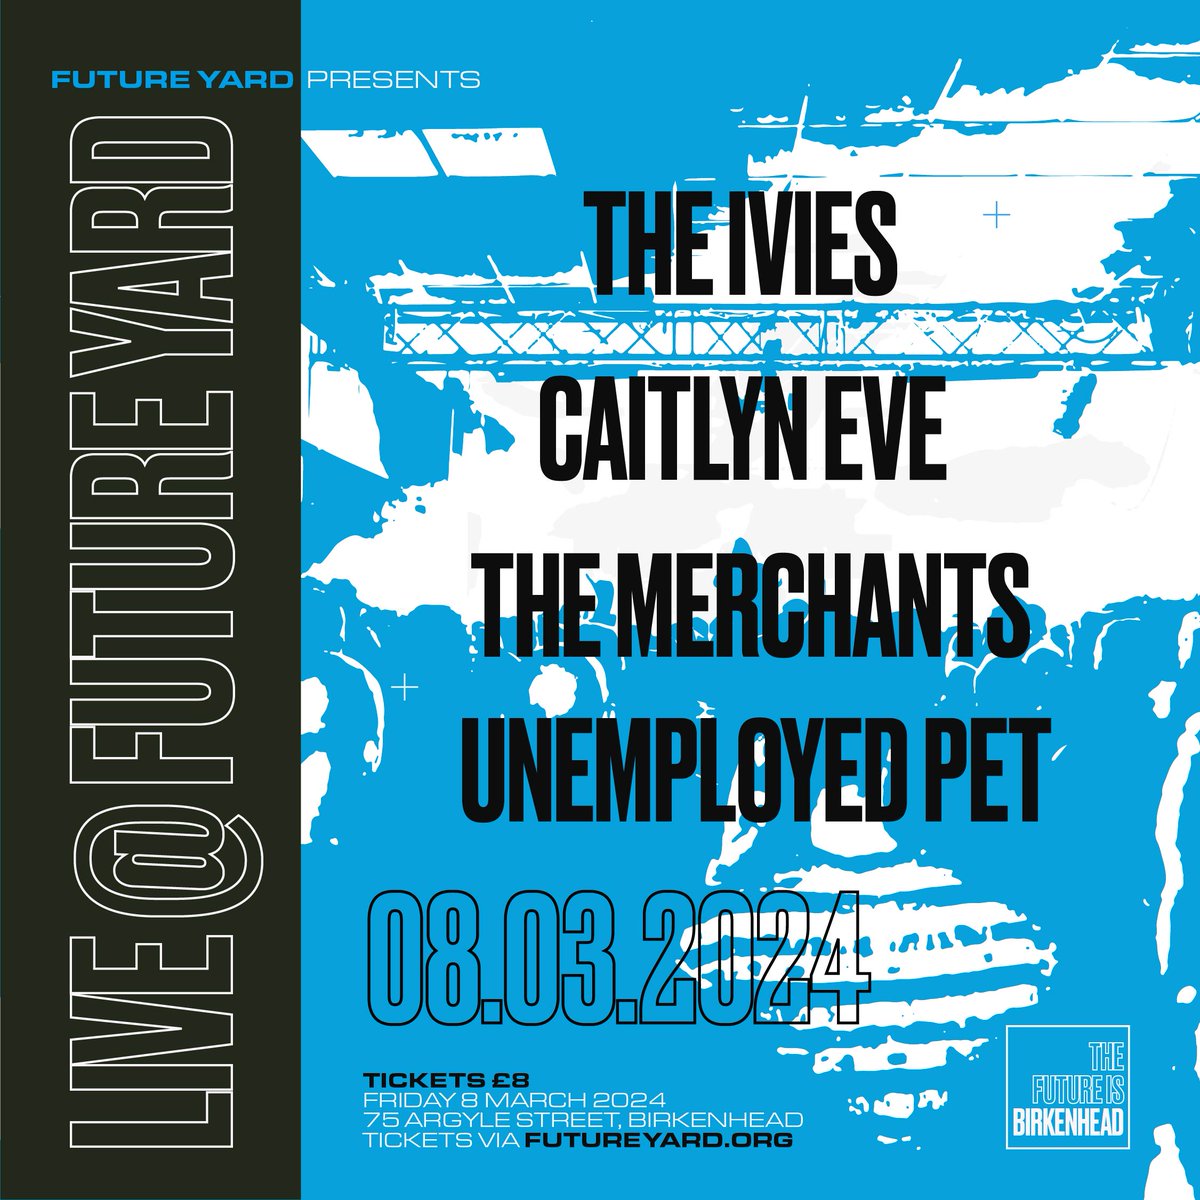 TONIGHT TONIGHT
Our social is back with free entry to tonights gig featuring a huge line up of @caitlyneve_, Unemployed Pet, @TheMerchants_UK and @iviesofficial.

Cath will also be around if you want to chat about how we can support you at @future_yard.

propeller.futureyard.org/programme/prop…